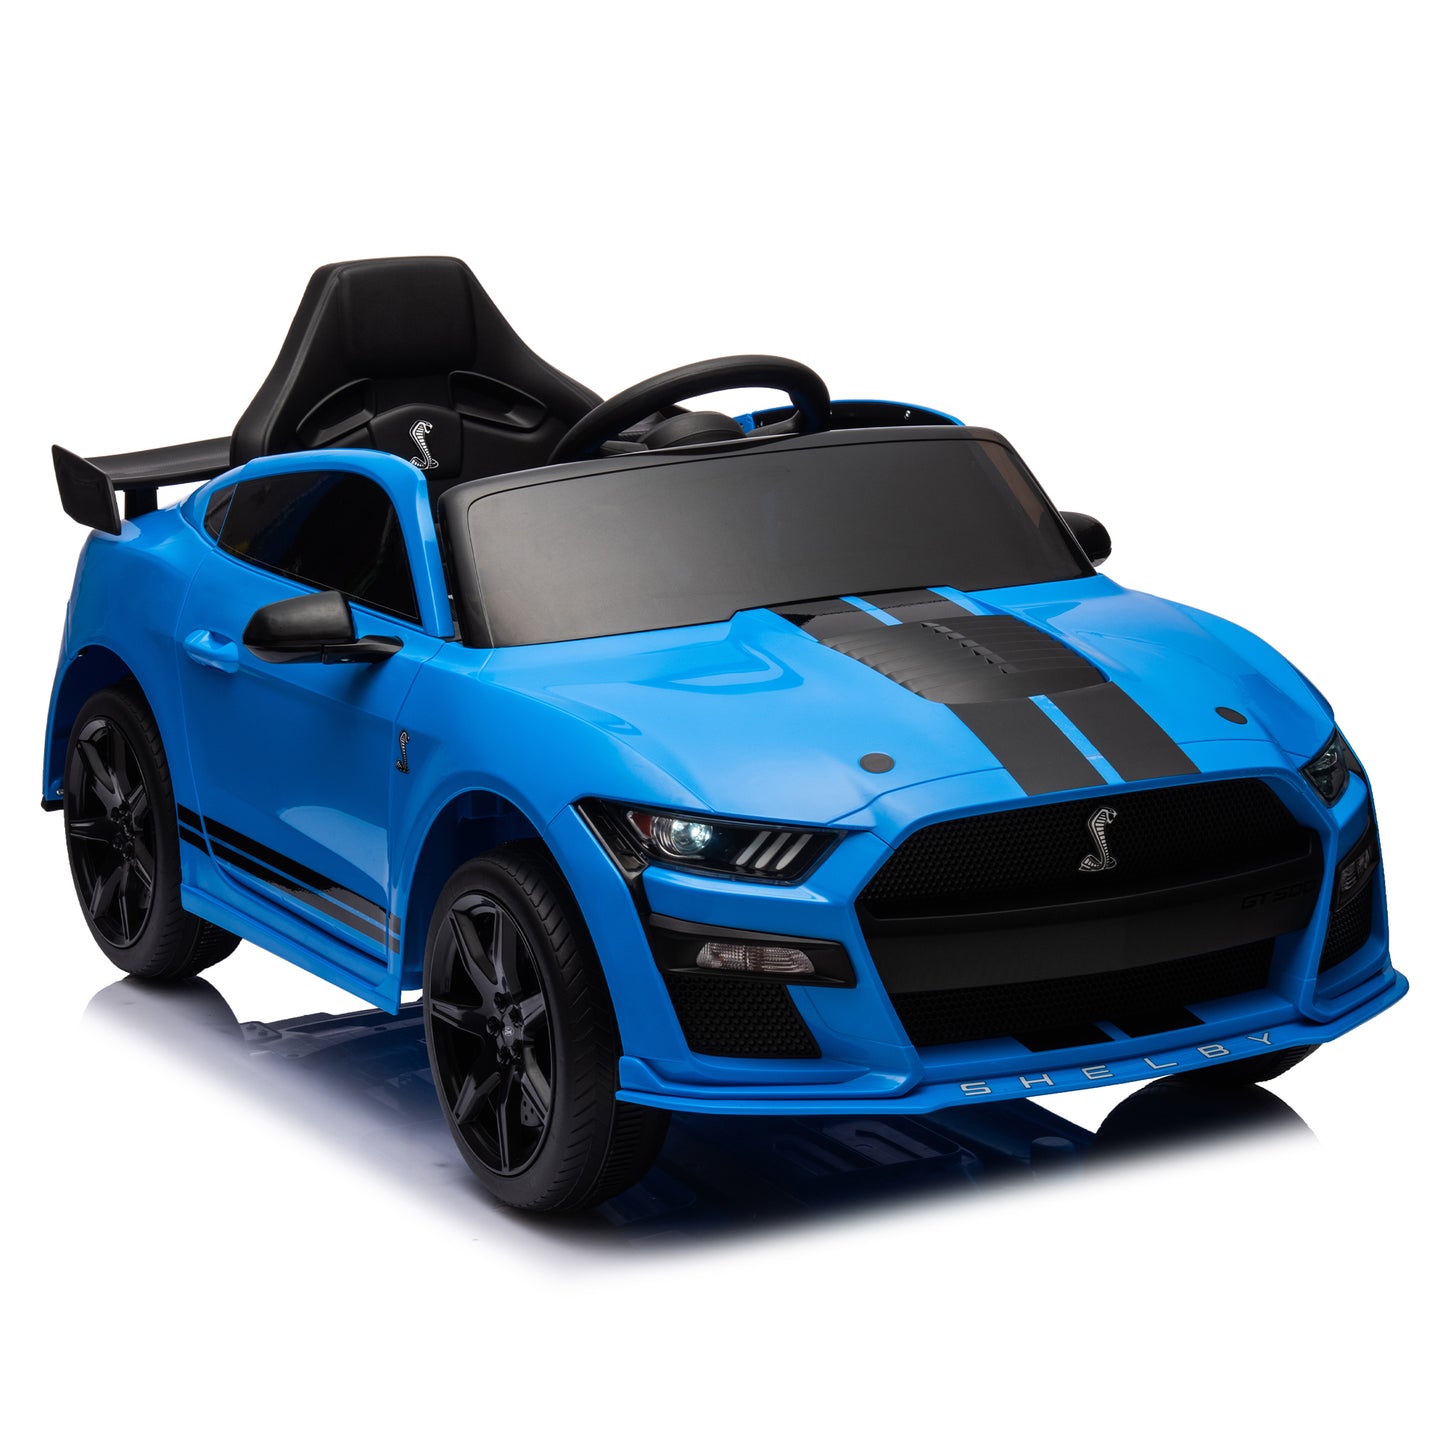 Ford Mustang Shelby GT500 Electric Ride-On Car for Kids - Remote Control, 3 Speeds, LED Lights, Radio, AUX/USB Music, Safe Belt - Age 3+